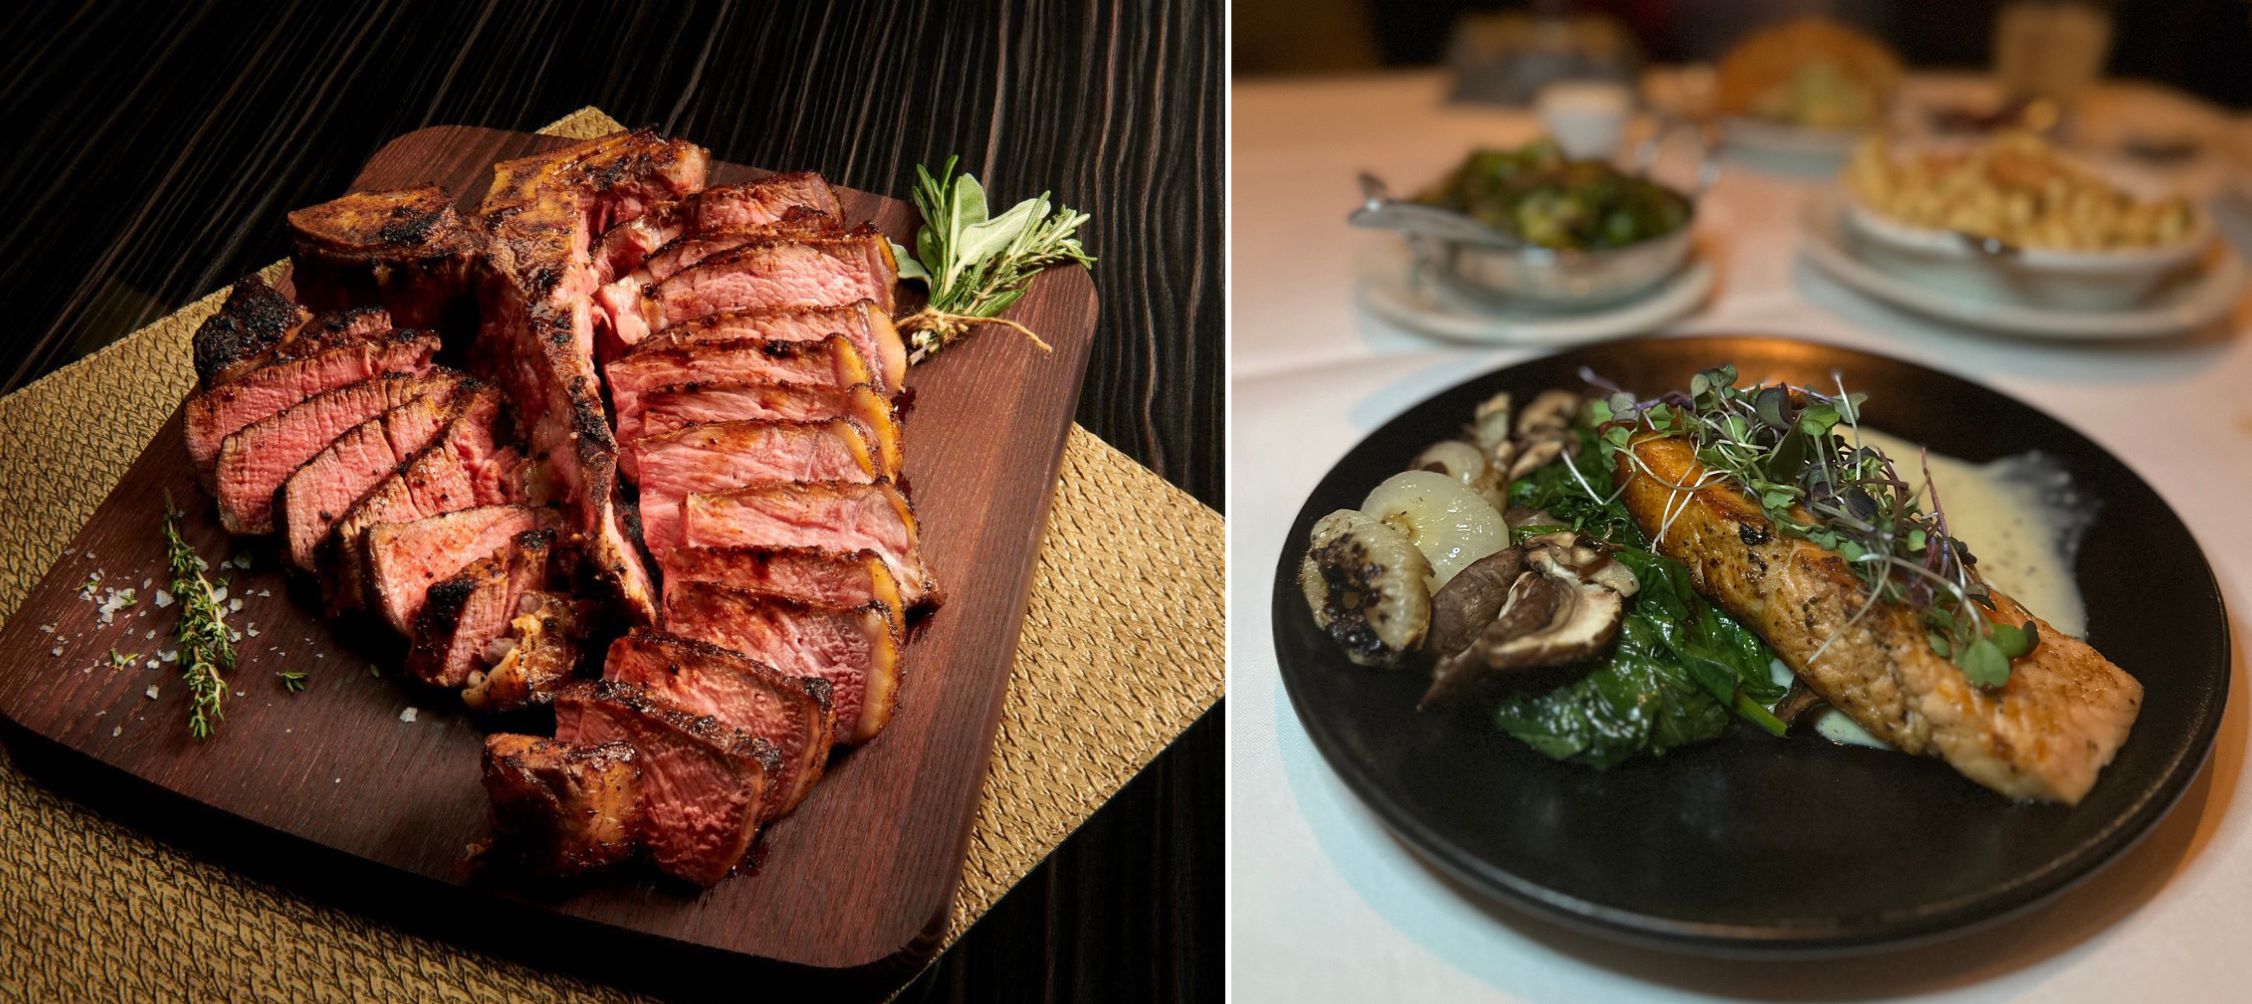 This Celeb Hot Spot is Known for its Juicy Steaks, Succulent Sides, and Mouthwatering Seafood